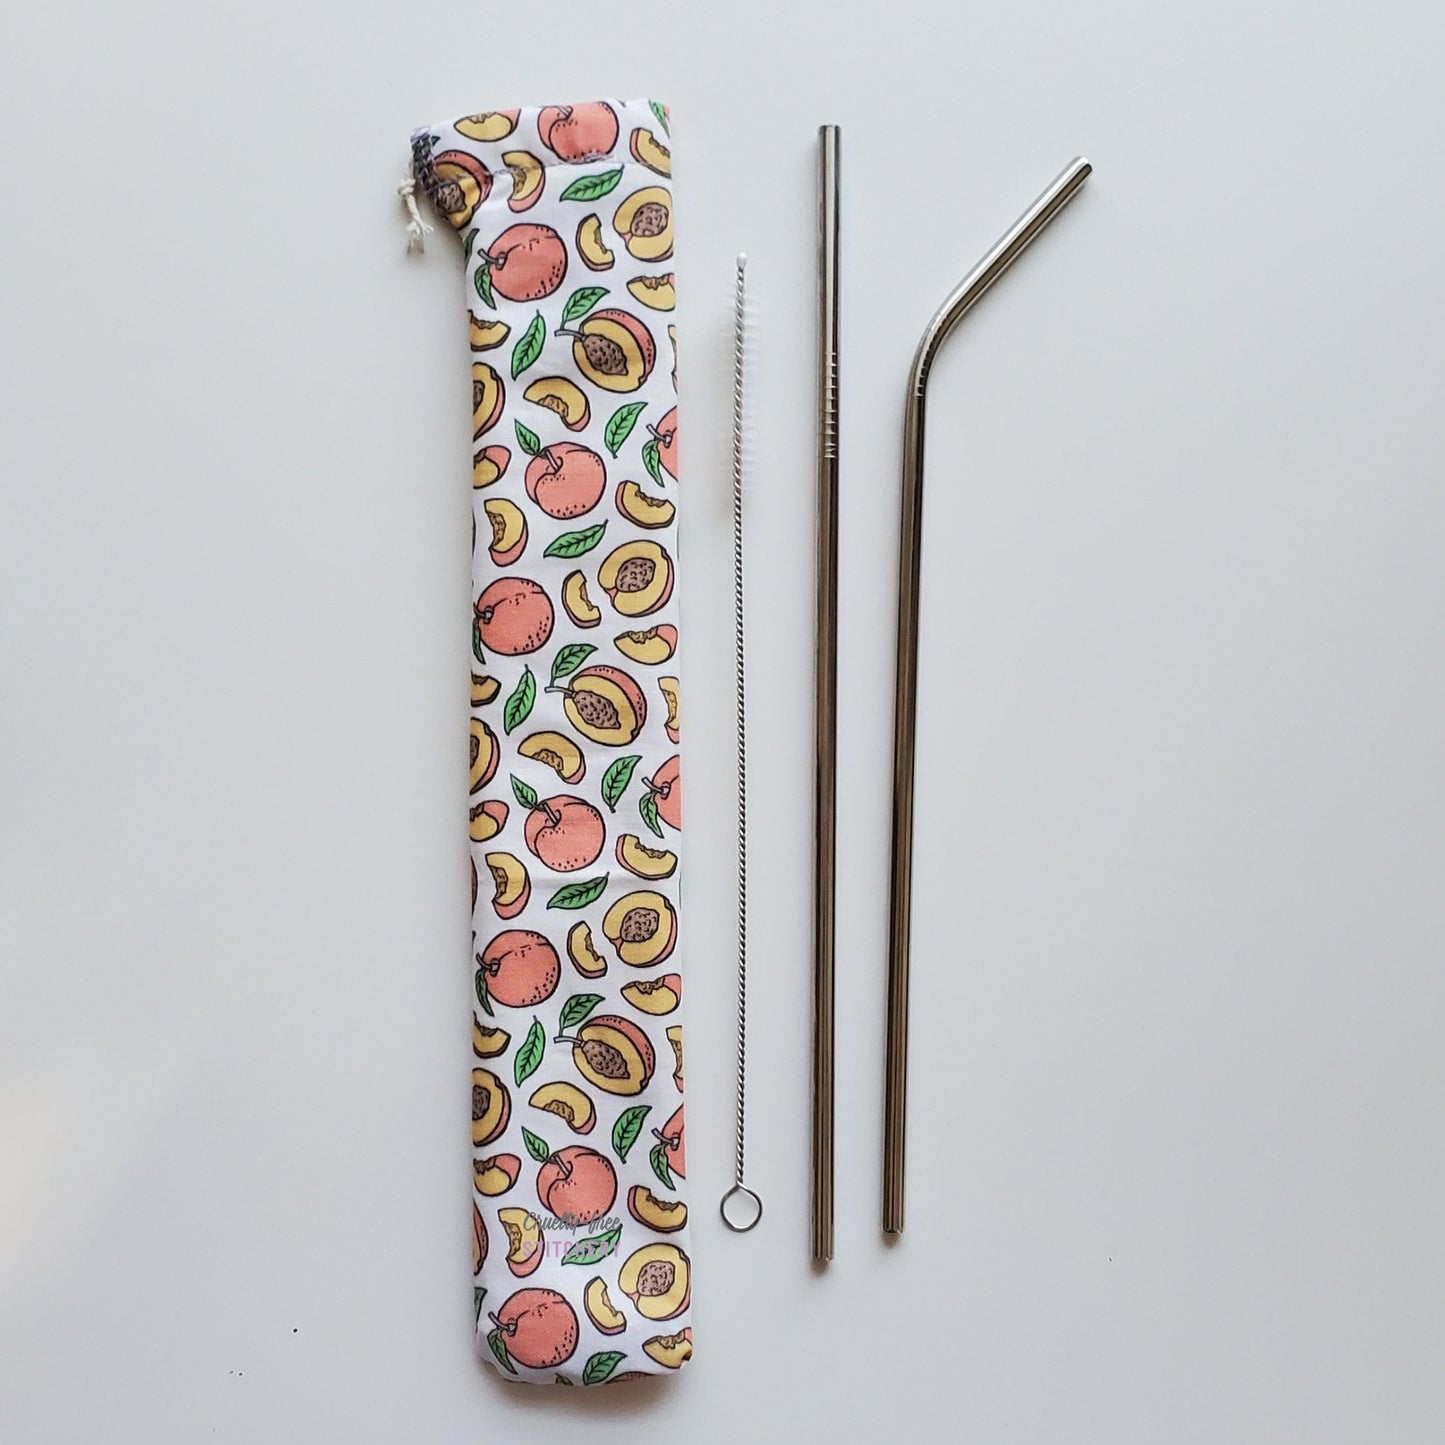 Reusable straw pouch in the same peaches print laying vertically next to a straw cleaner brush, a straight stainless steel straw, and a bent stainless steel straw.